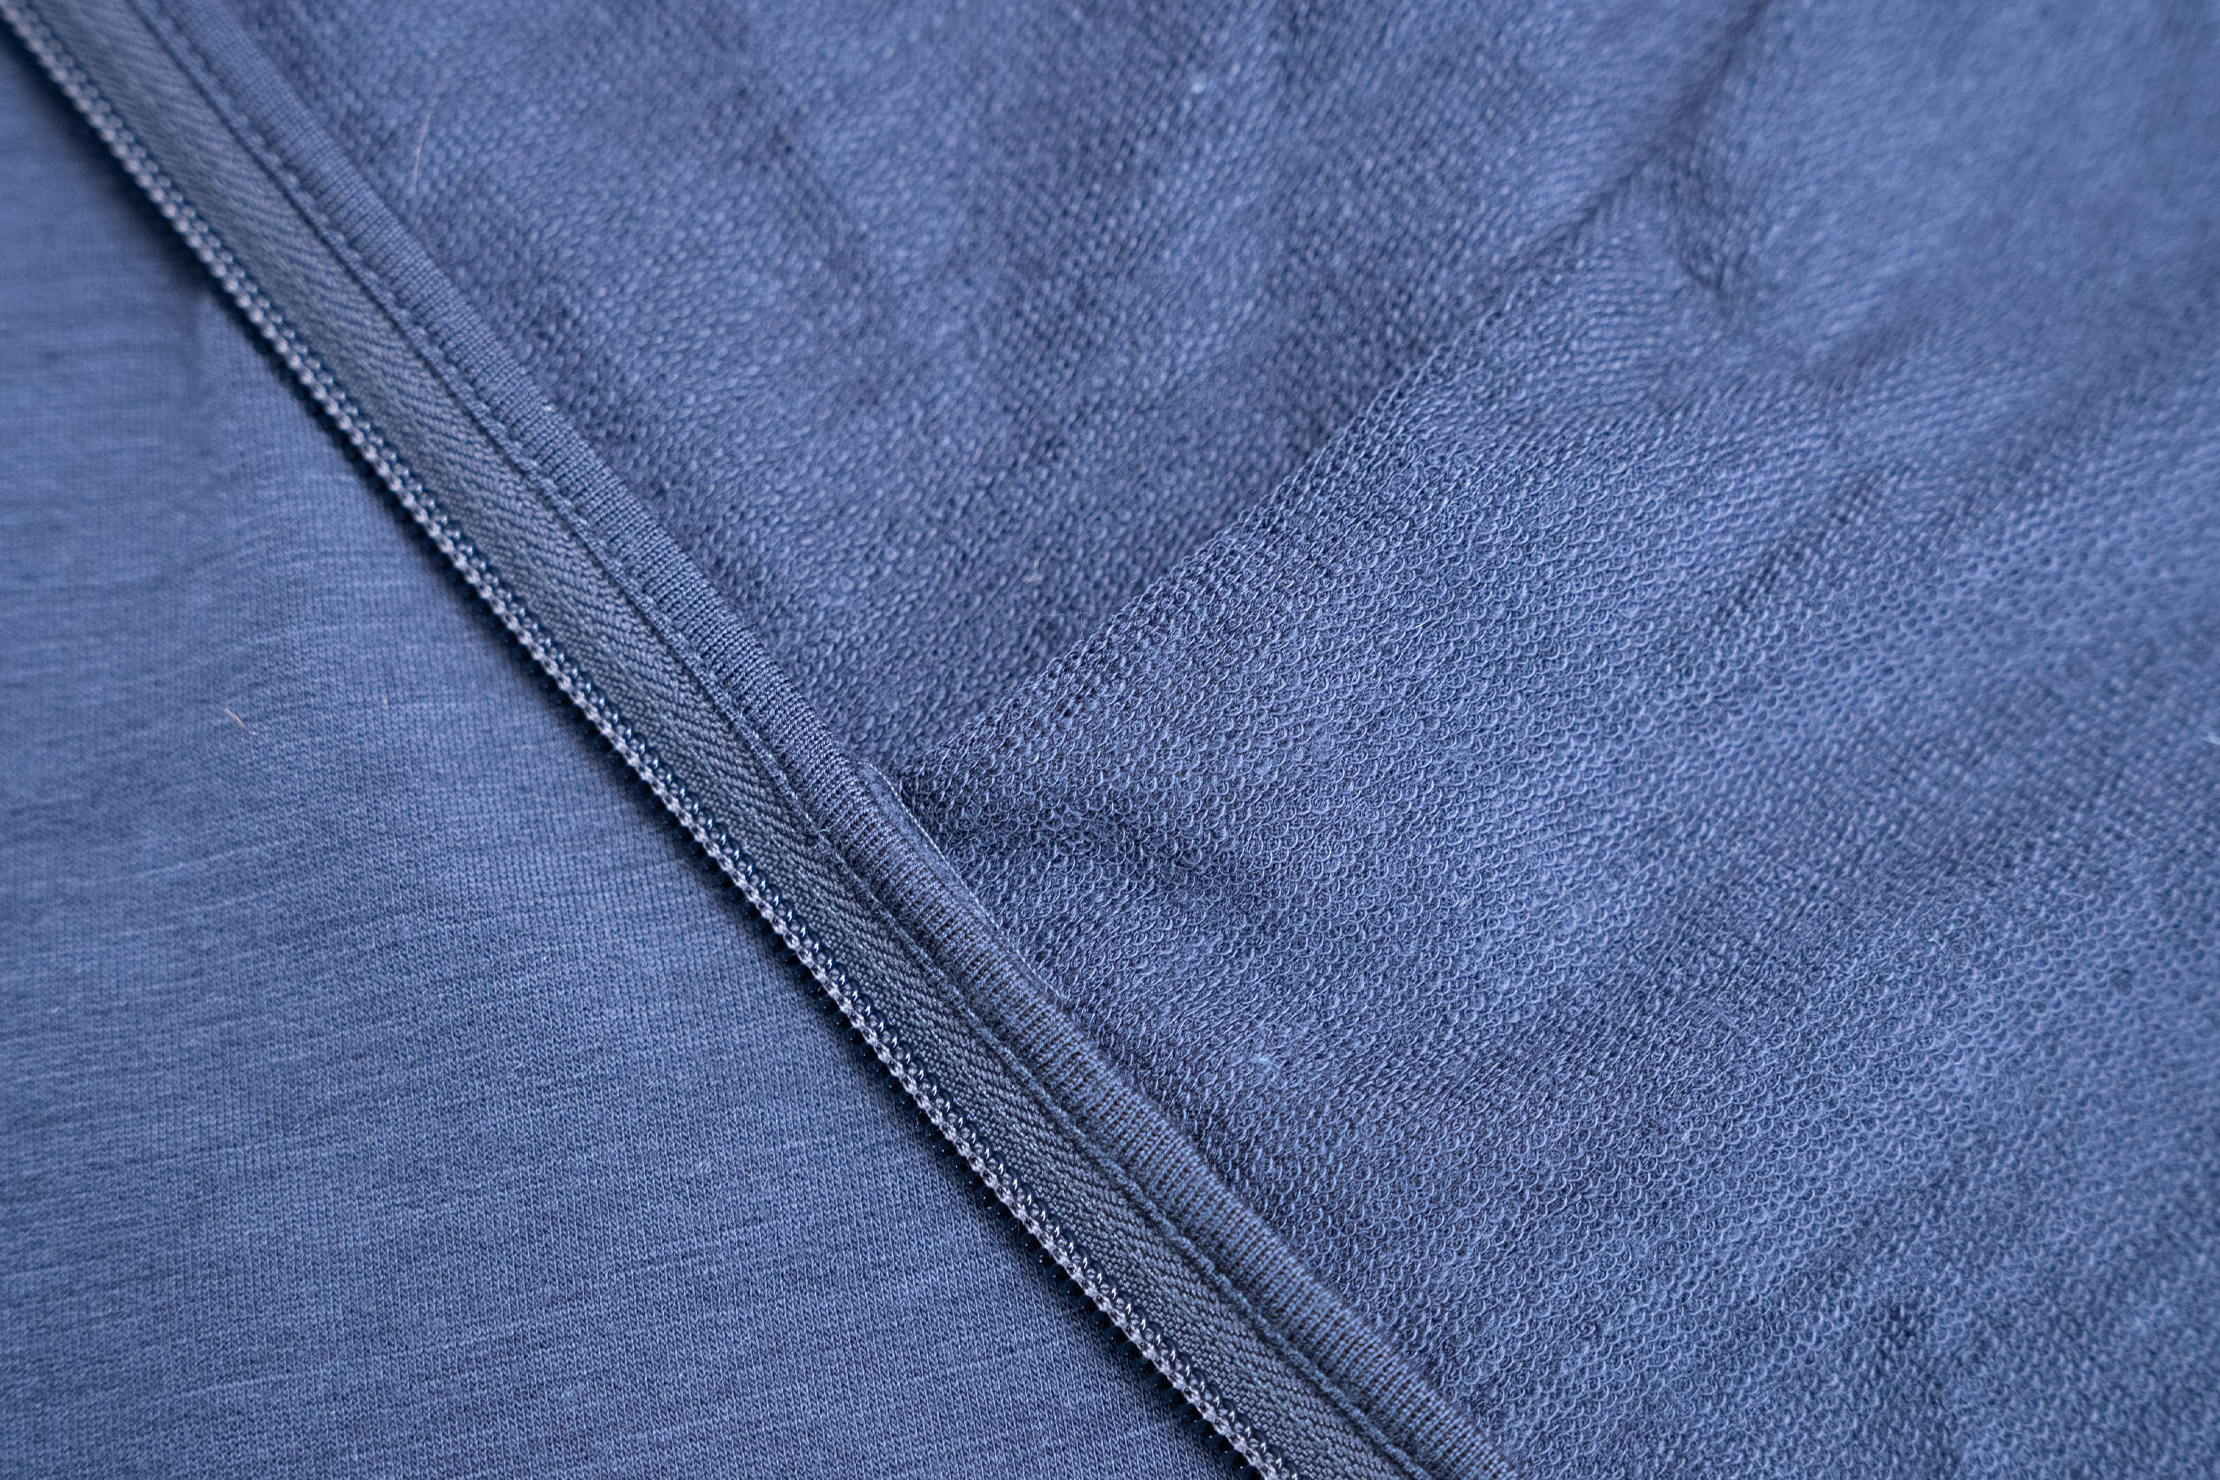 Unbound Merino Compact Travel Hoodie Material